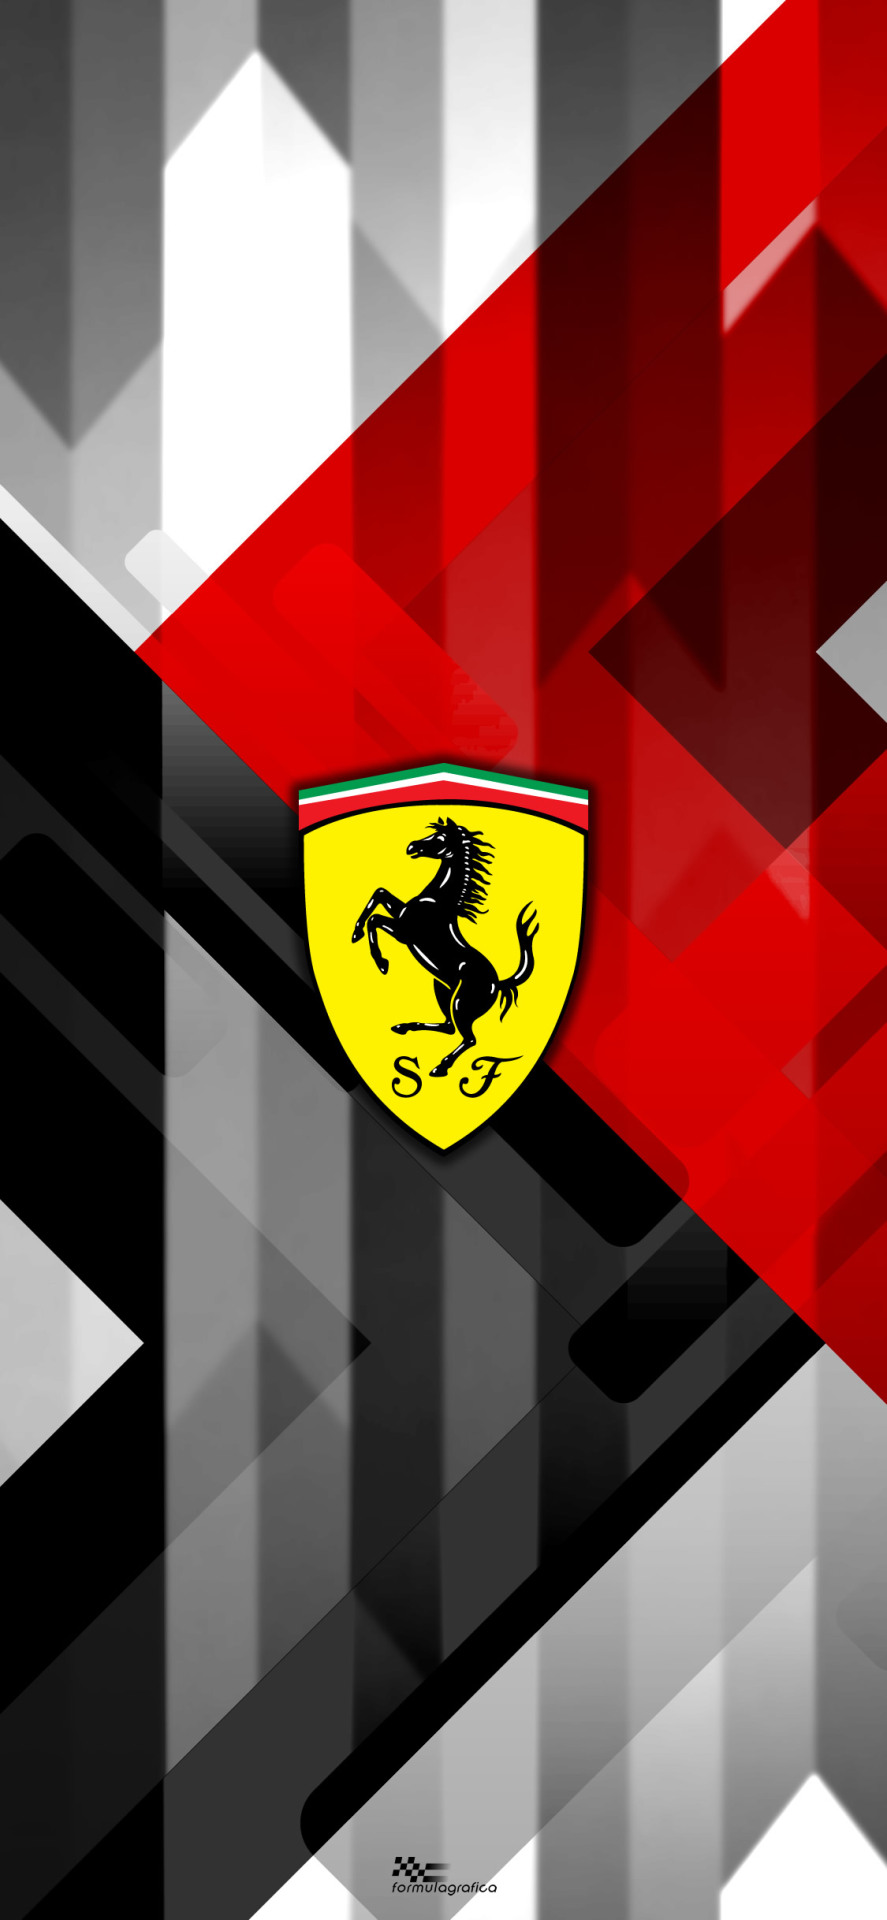 F1 Logo Wallpapers